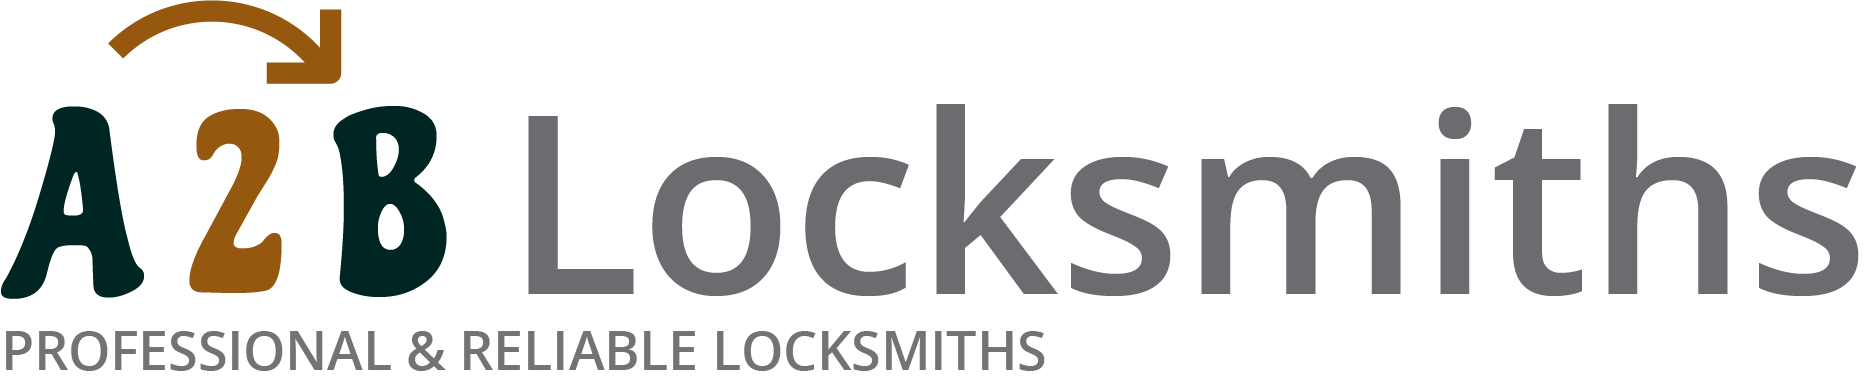 If you are locked out of house in Birchington, our 24/7 local emergency locksmith services can help you.